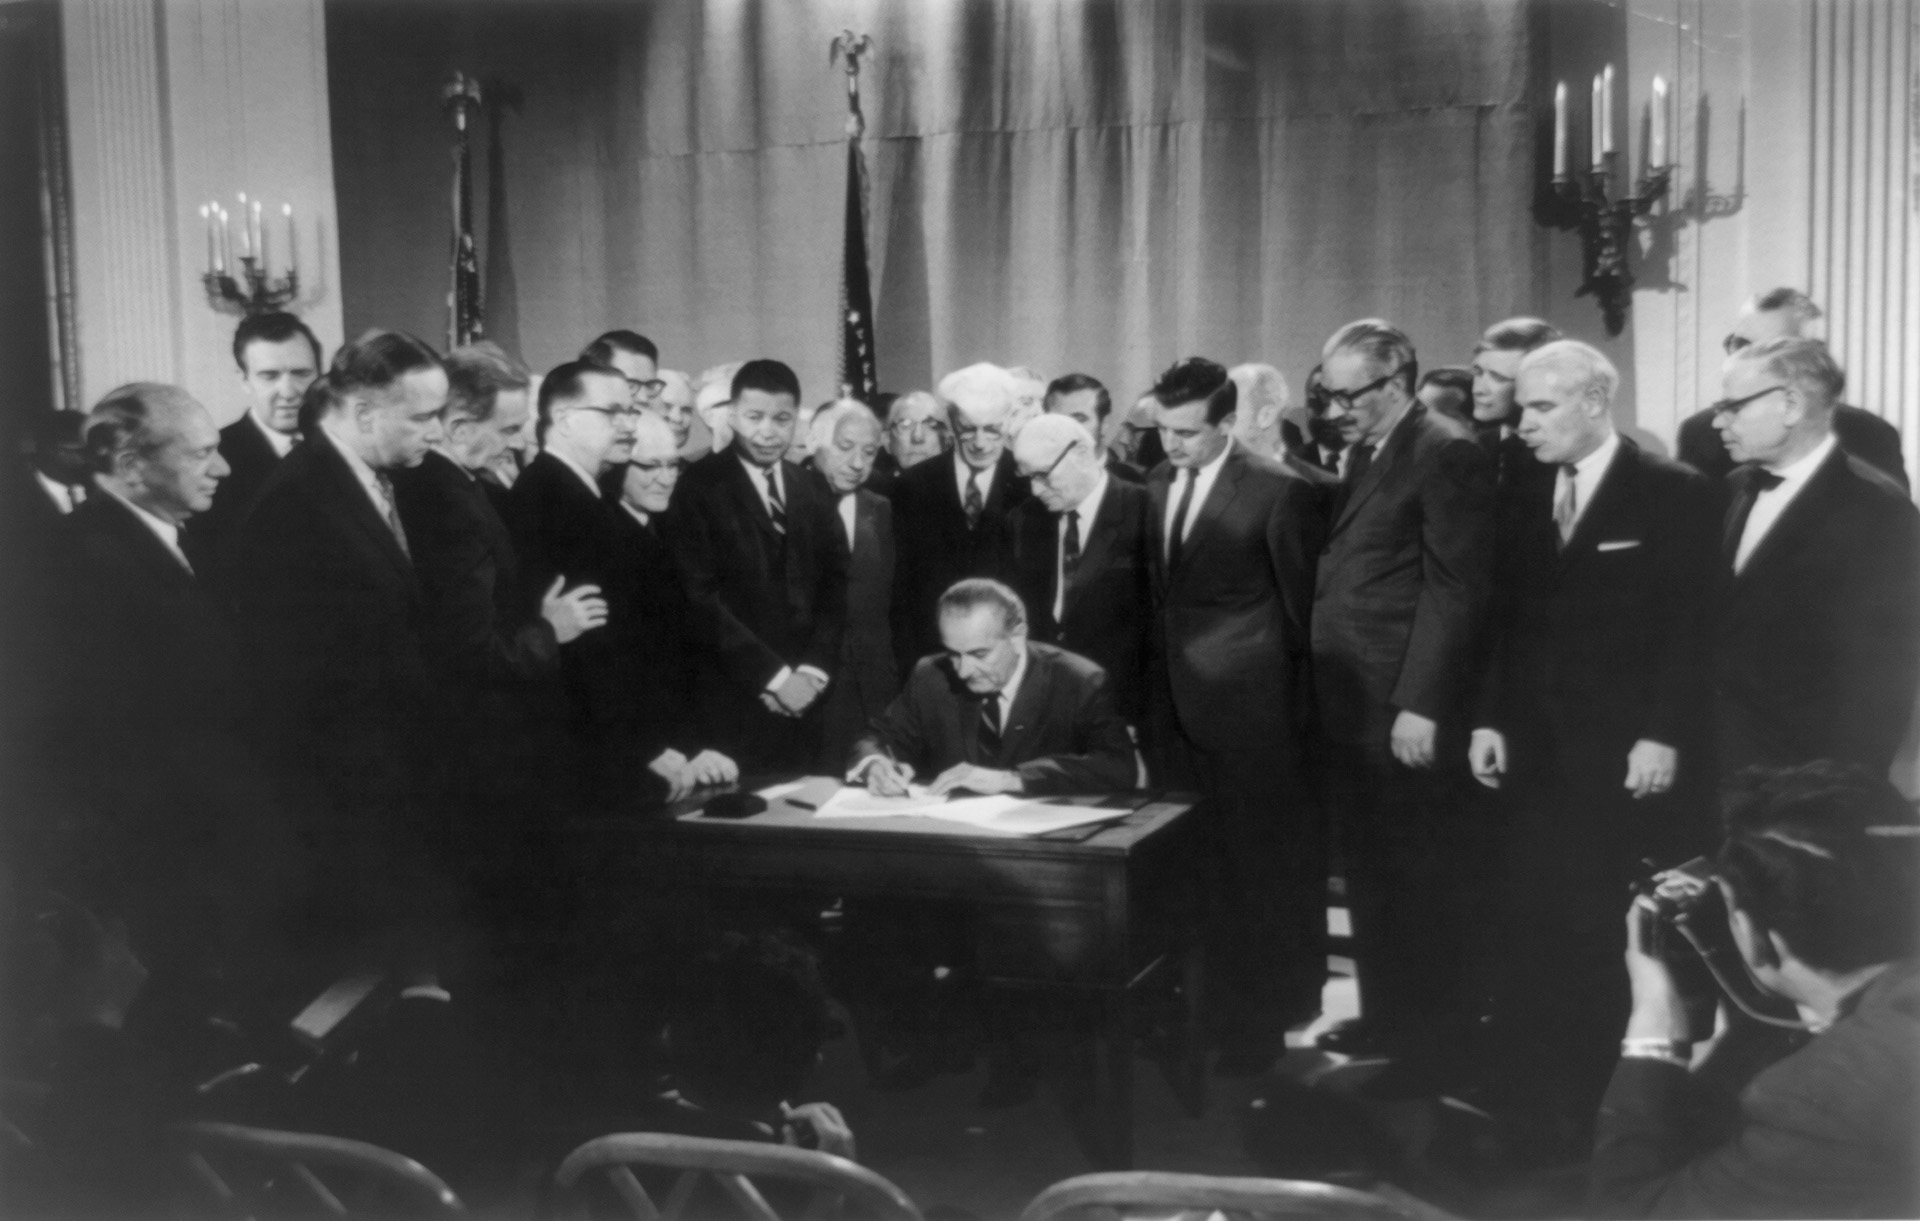 President Lyndon Baines Johnson signing the 1968 Civil Rights Act that included fair housing on April 11, 1968.